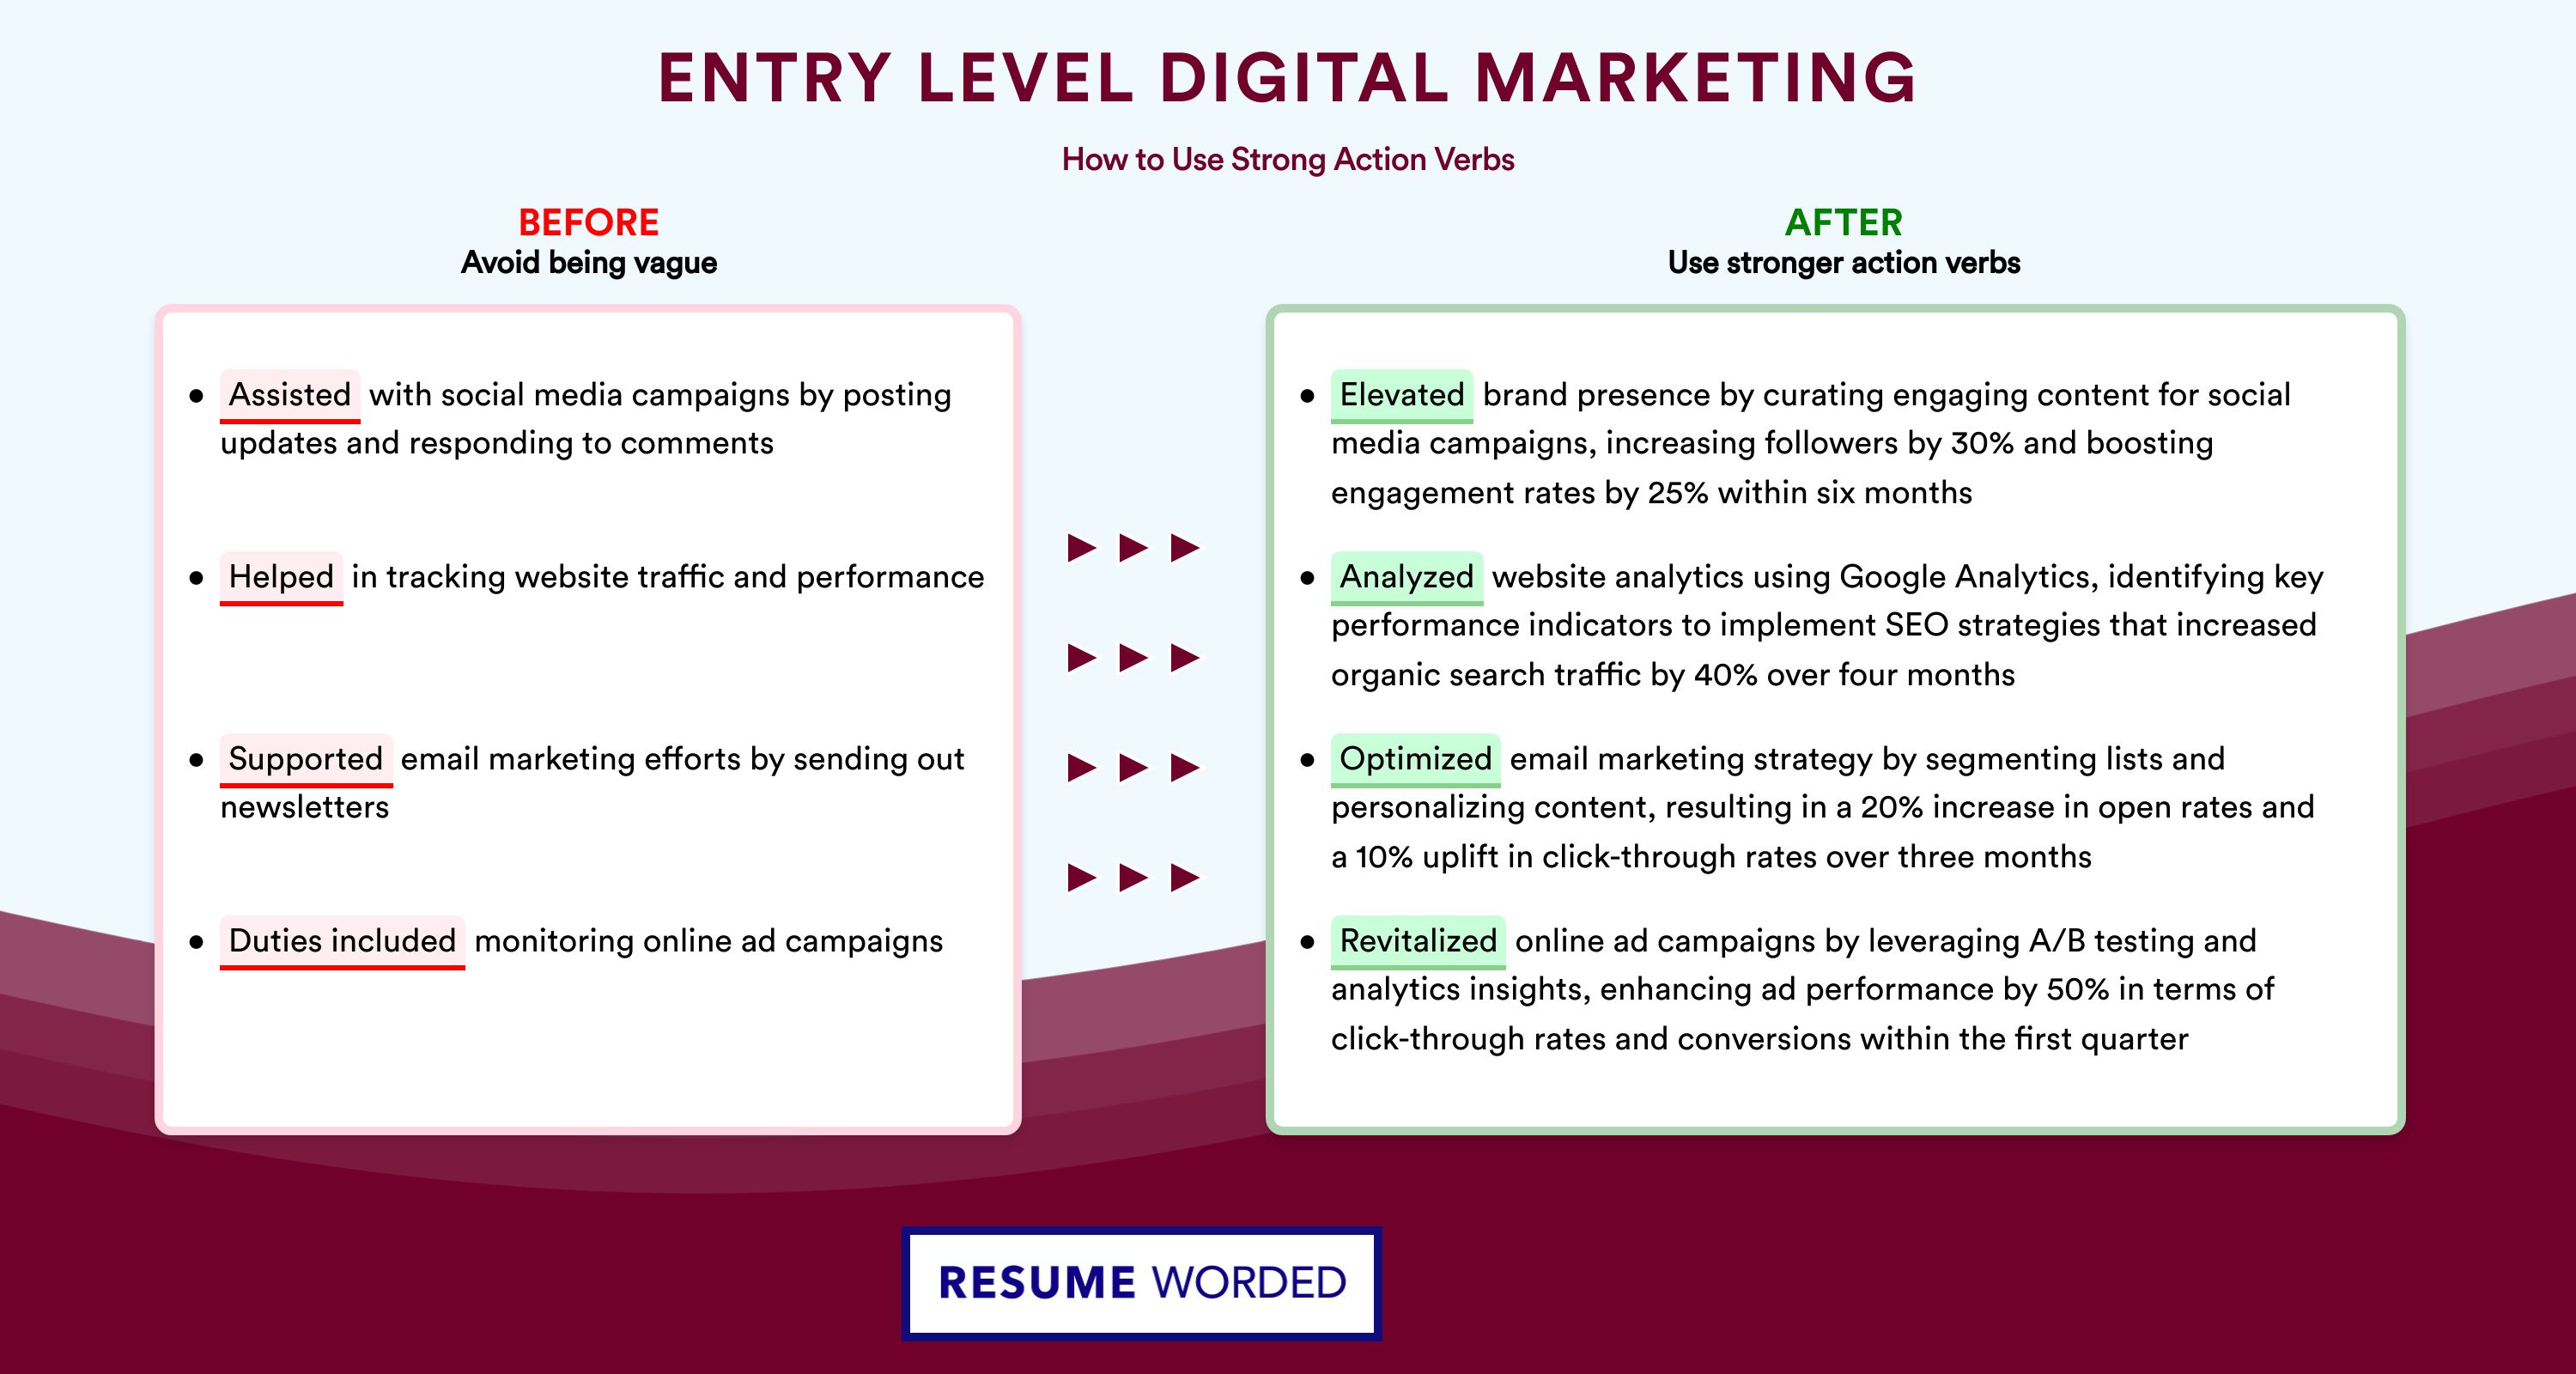 Action Verbs for Entry Level Digital Marketing